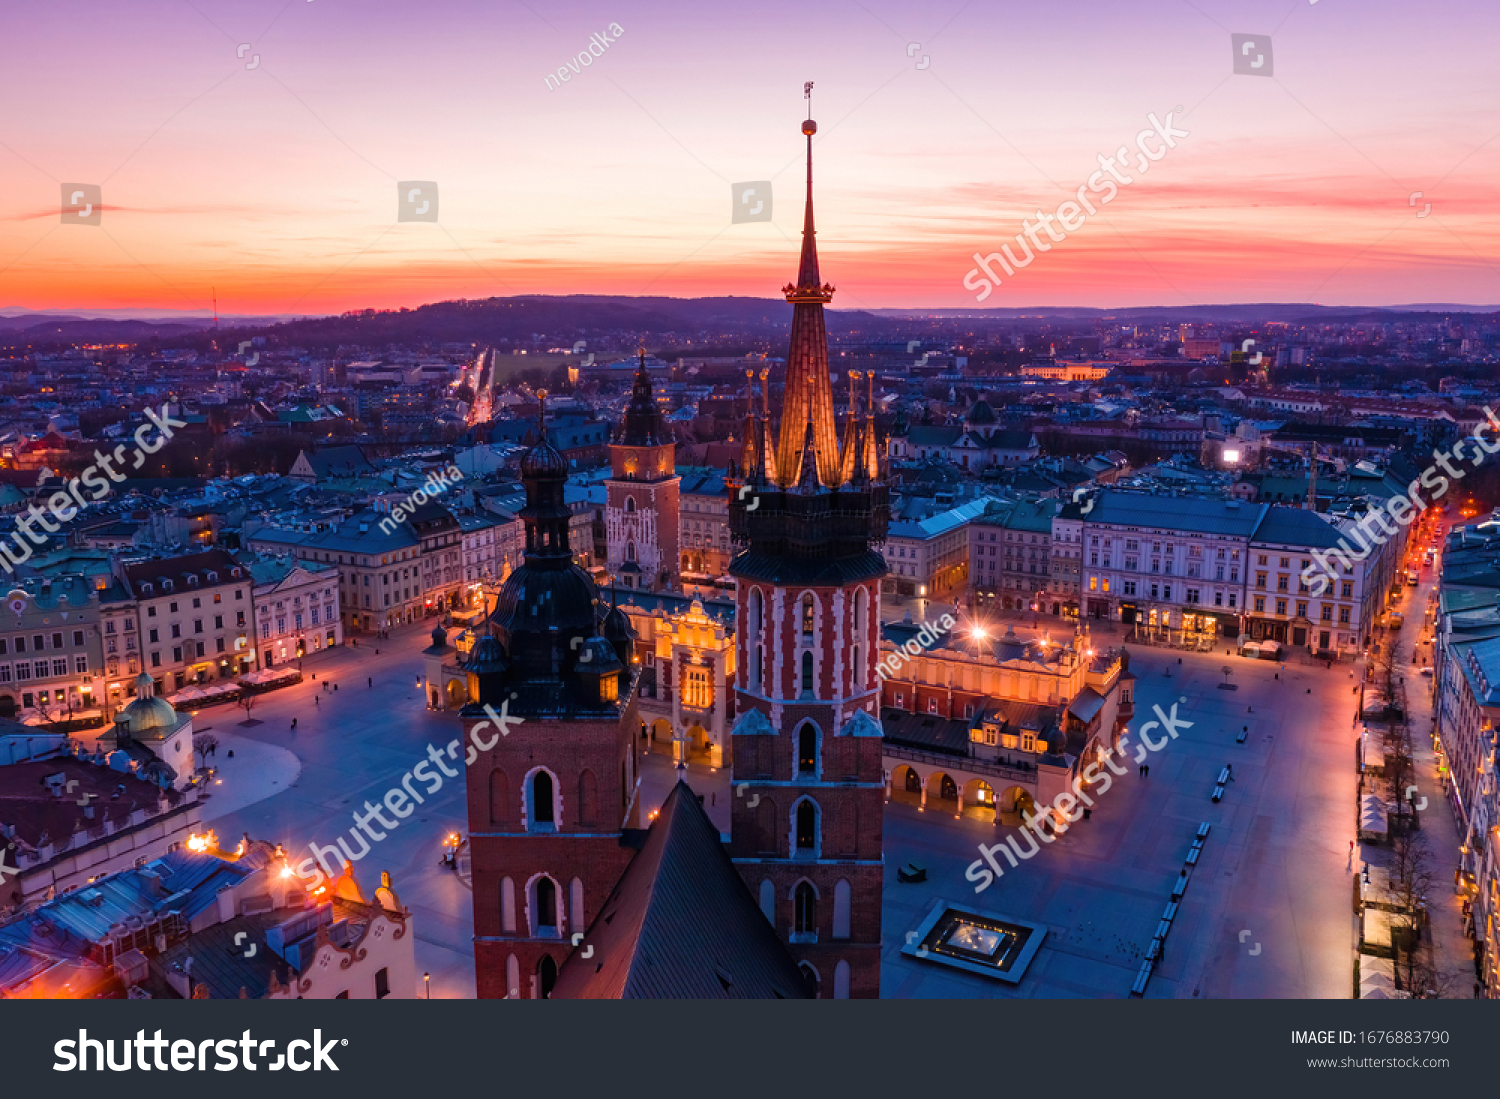 Basilica at Krakow old town city square at twilight drone view #1676883790